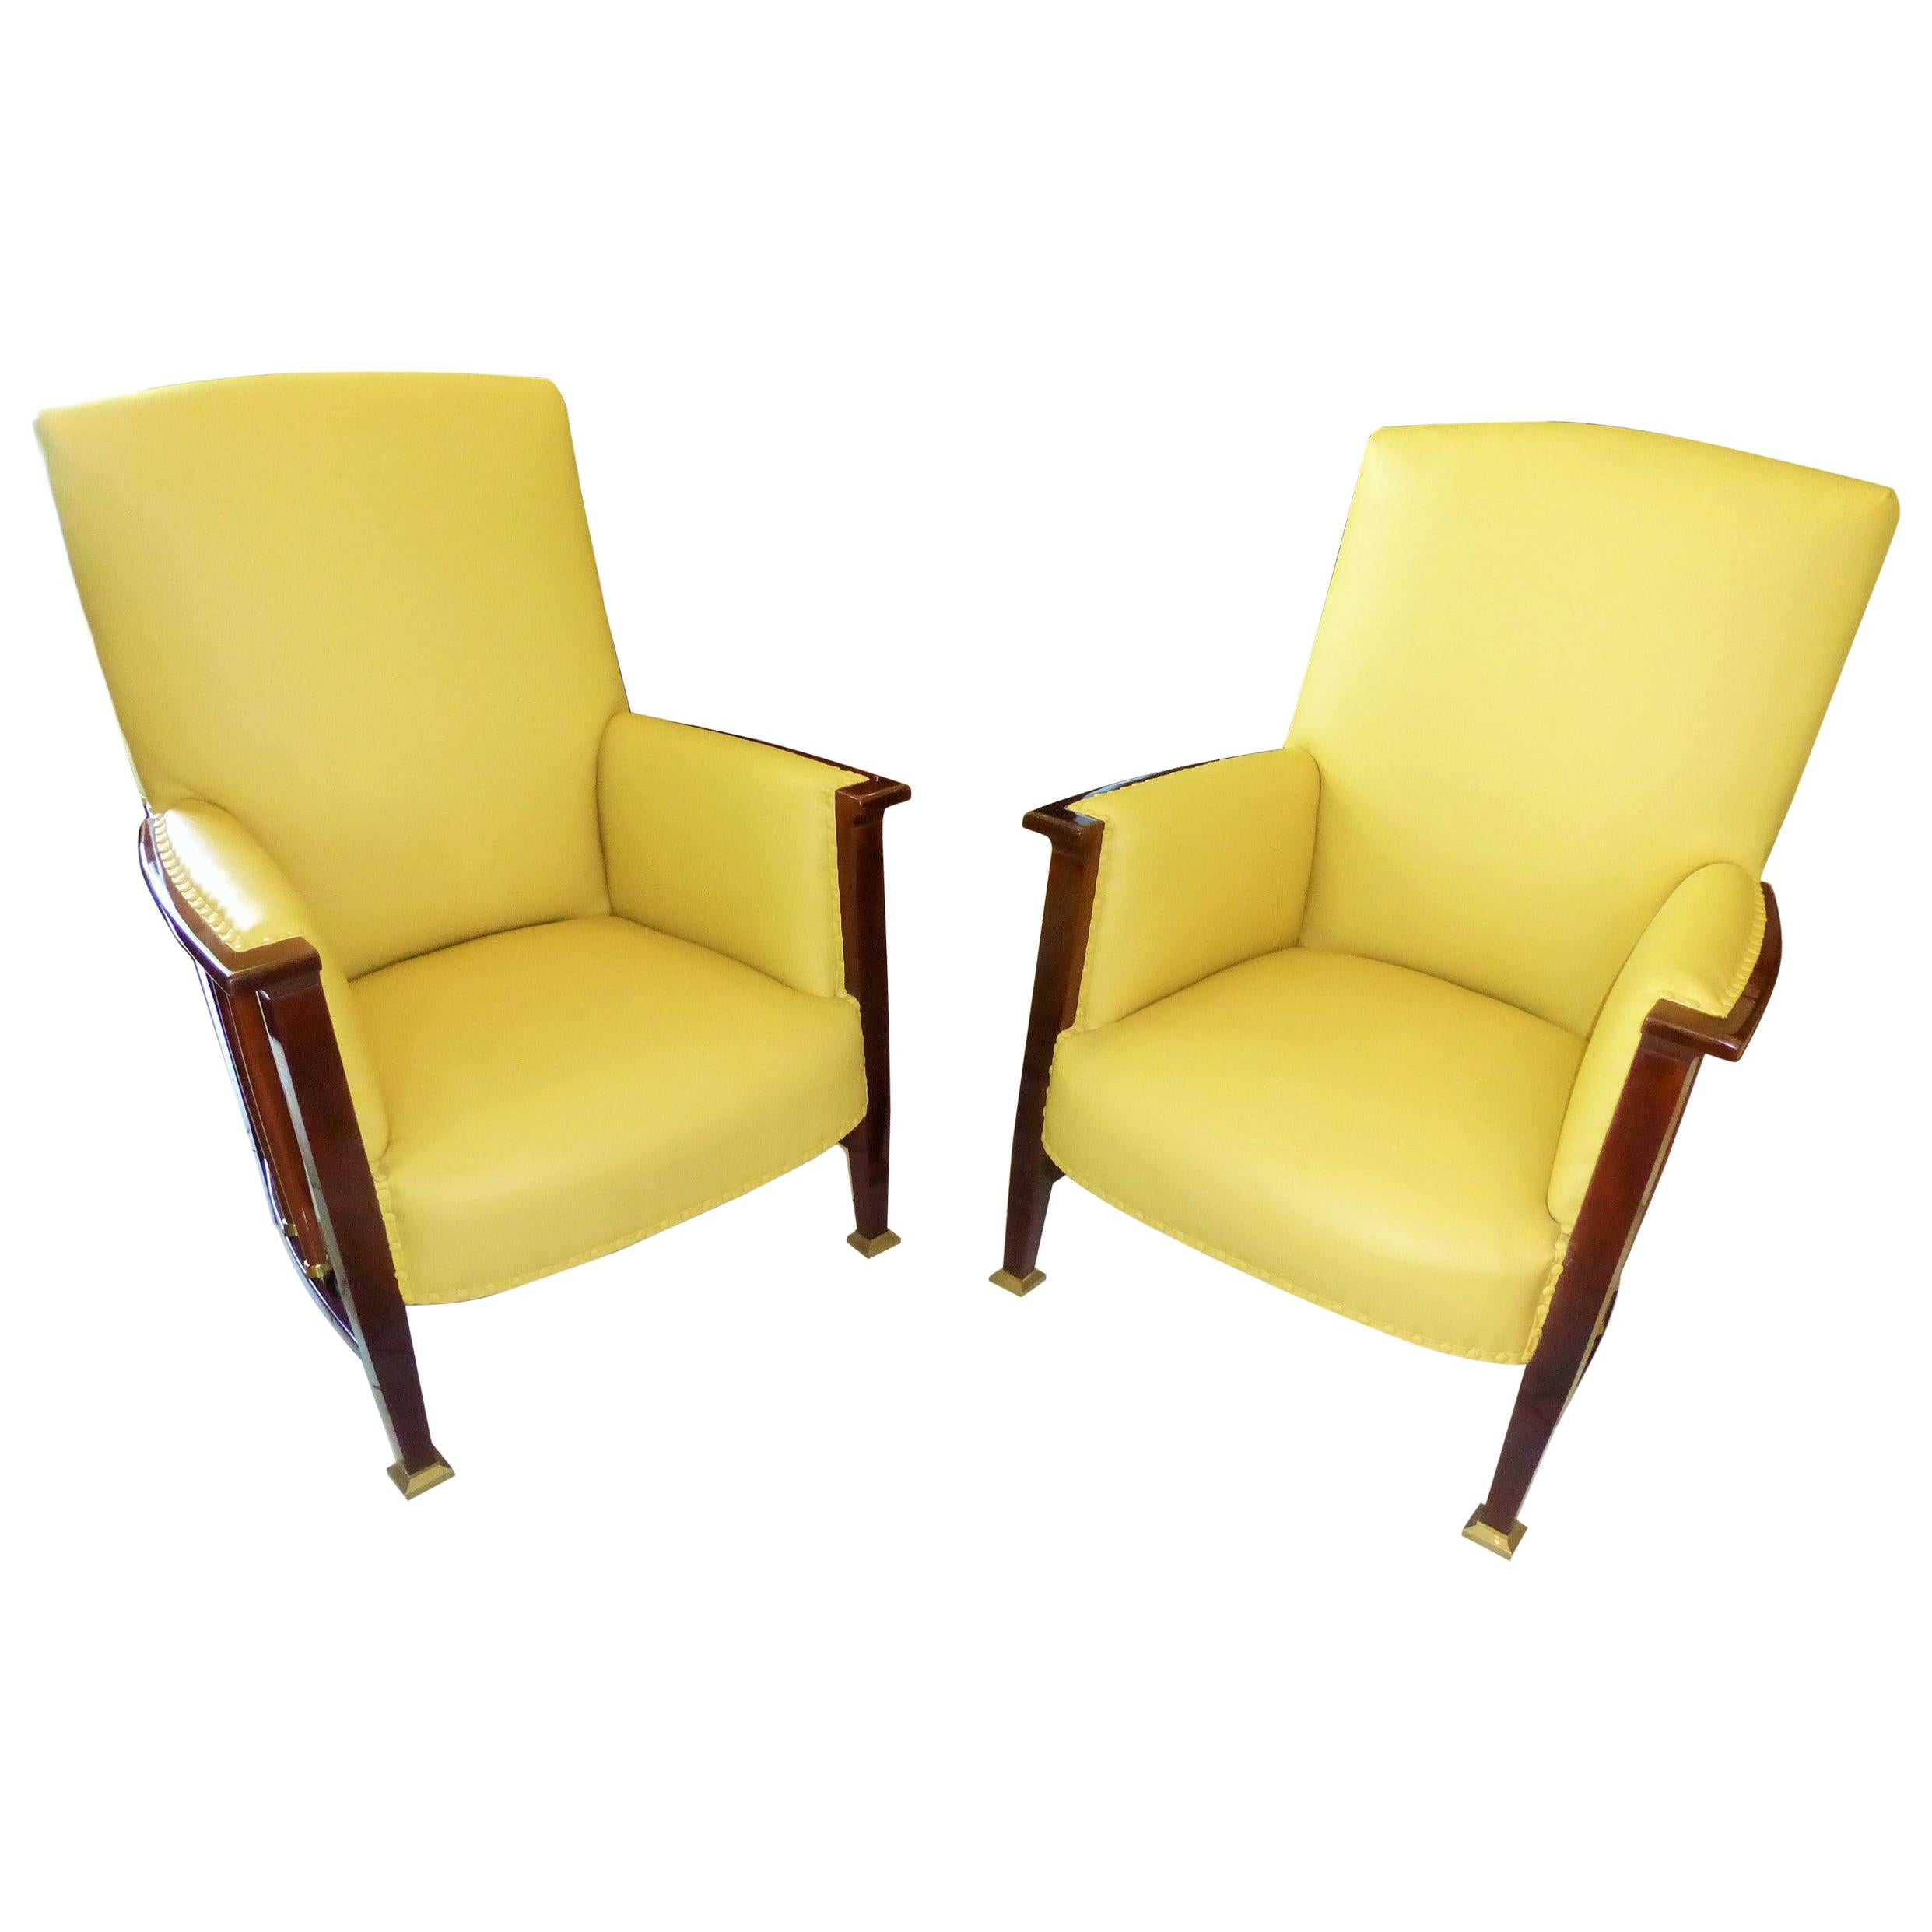 Art Nouveau Armchairs from 1910 Made of Mahogany with Yellow Leather For Sale